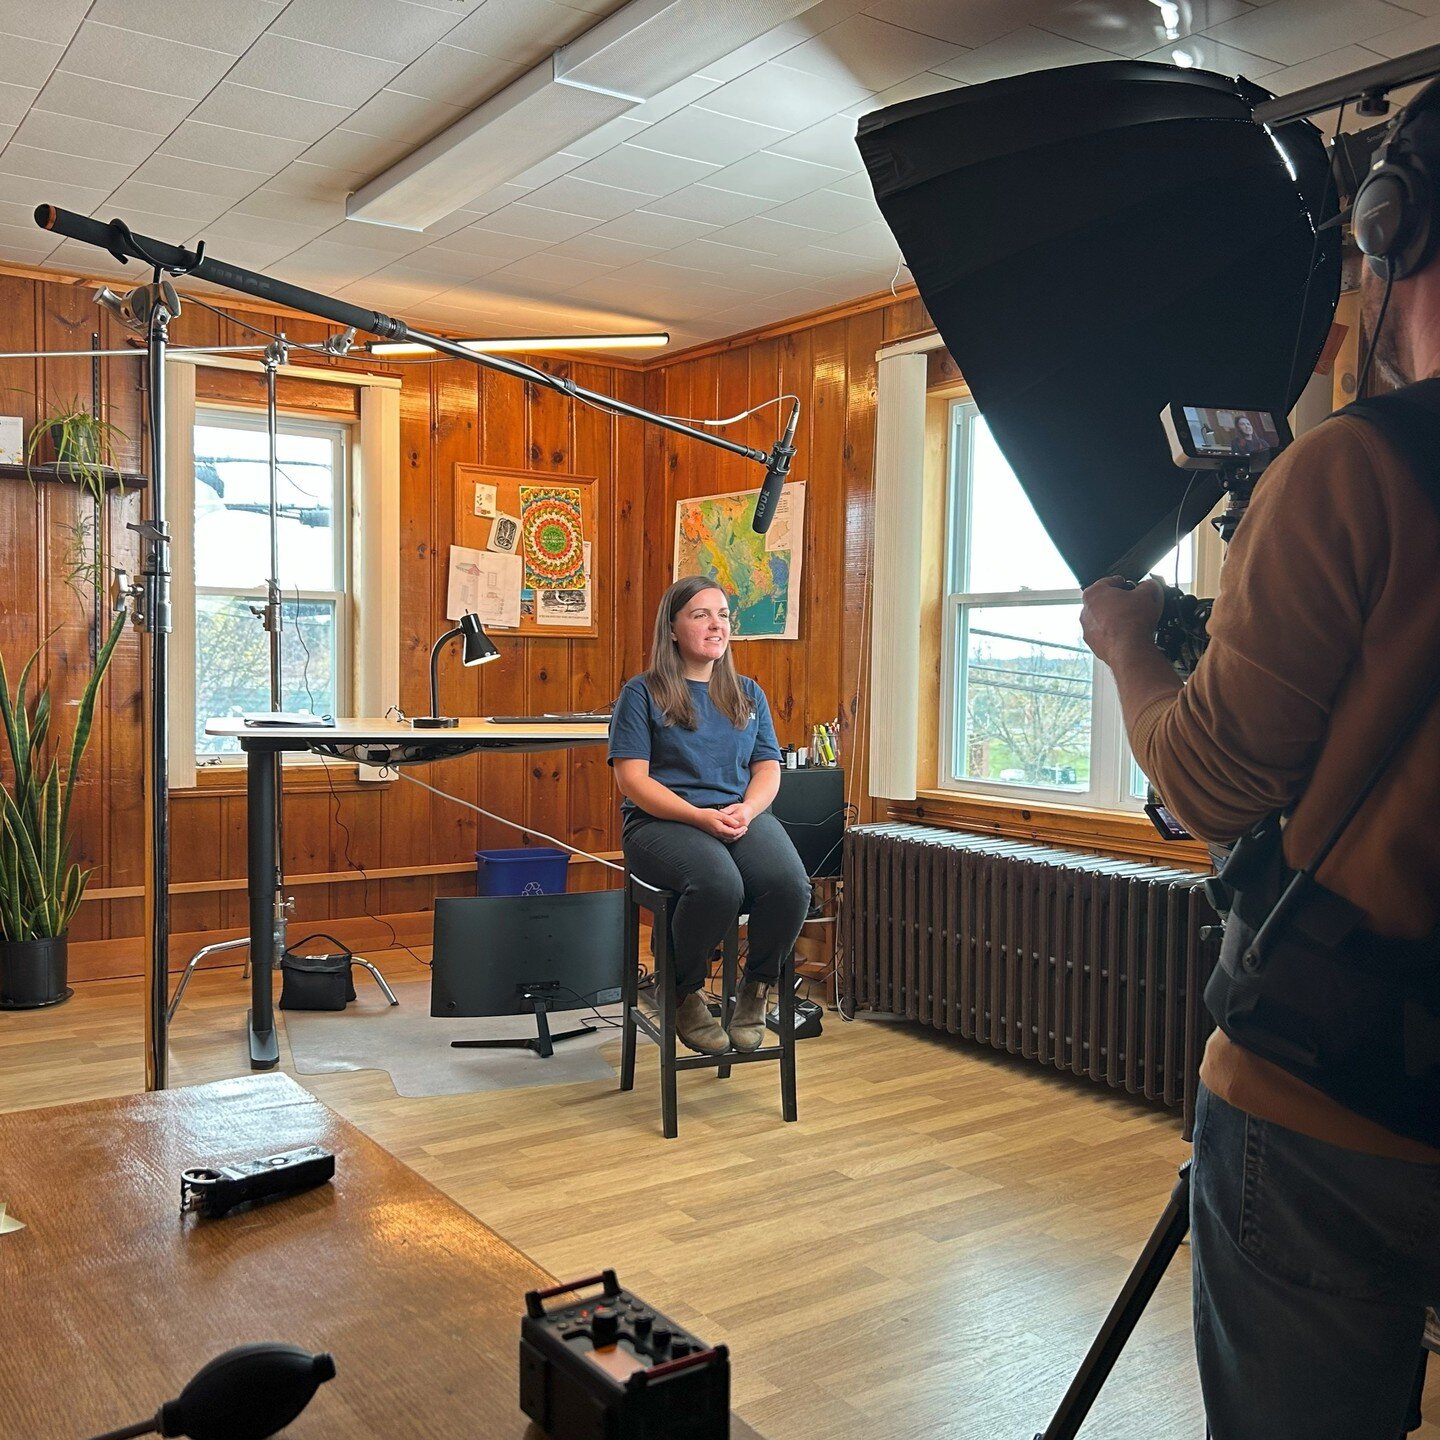 Behind the scenes photos of two of our staff interviewing with @thegaiaproject_ about working in green jobs. Keep an eye out for the full video to hear what Courtney and Zaria have to say about it! 
#greenjobs